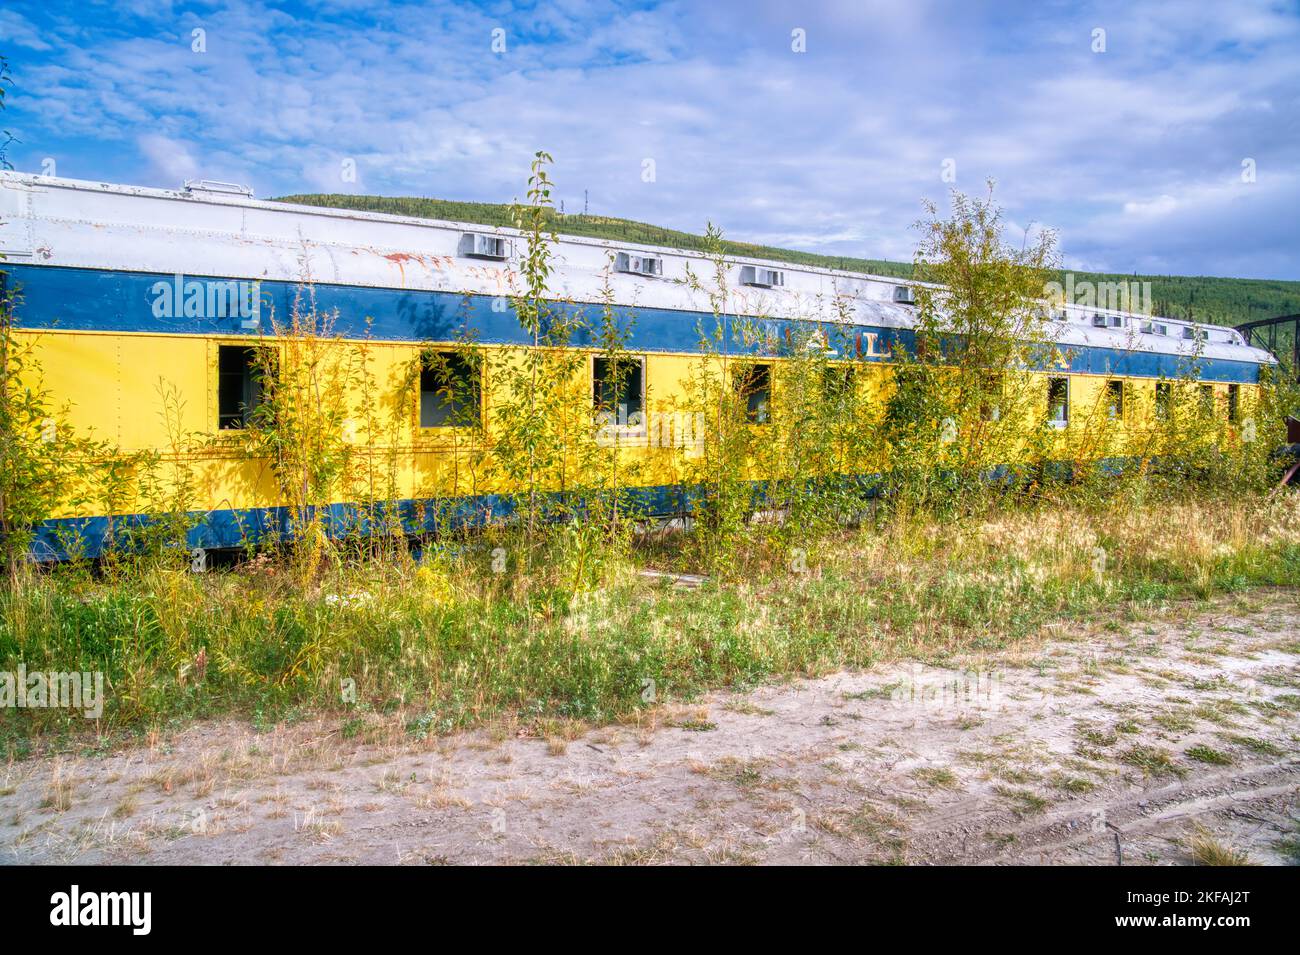 Abandoned and overgrown old railroad passenger car in Alaska Stock Photo